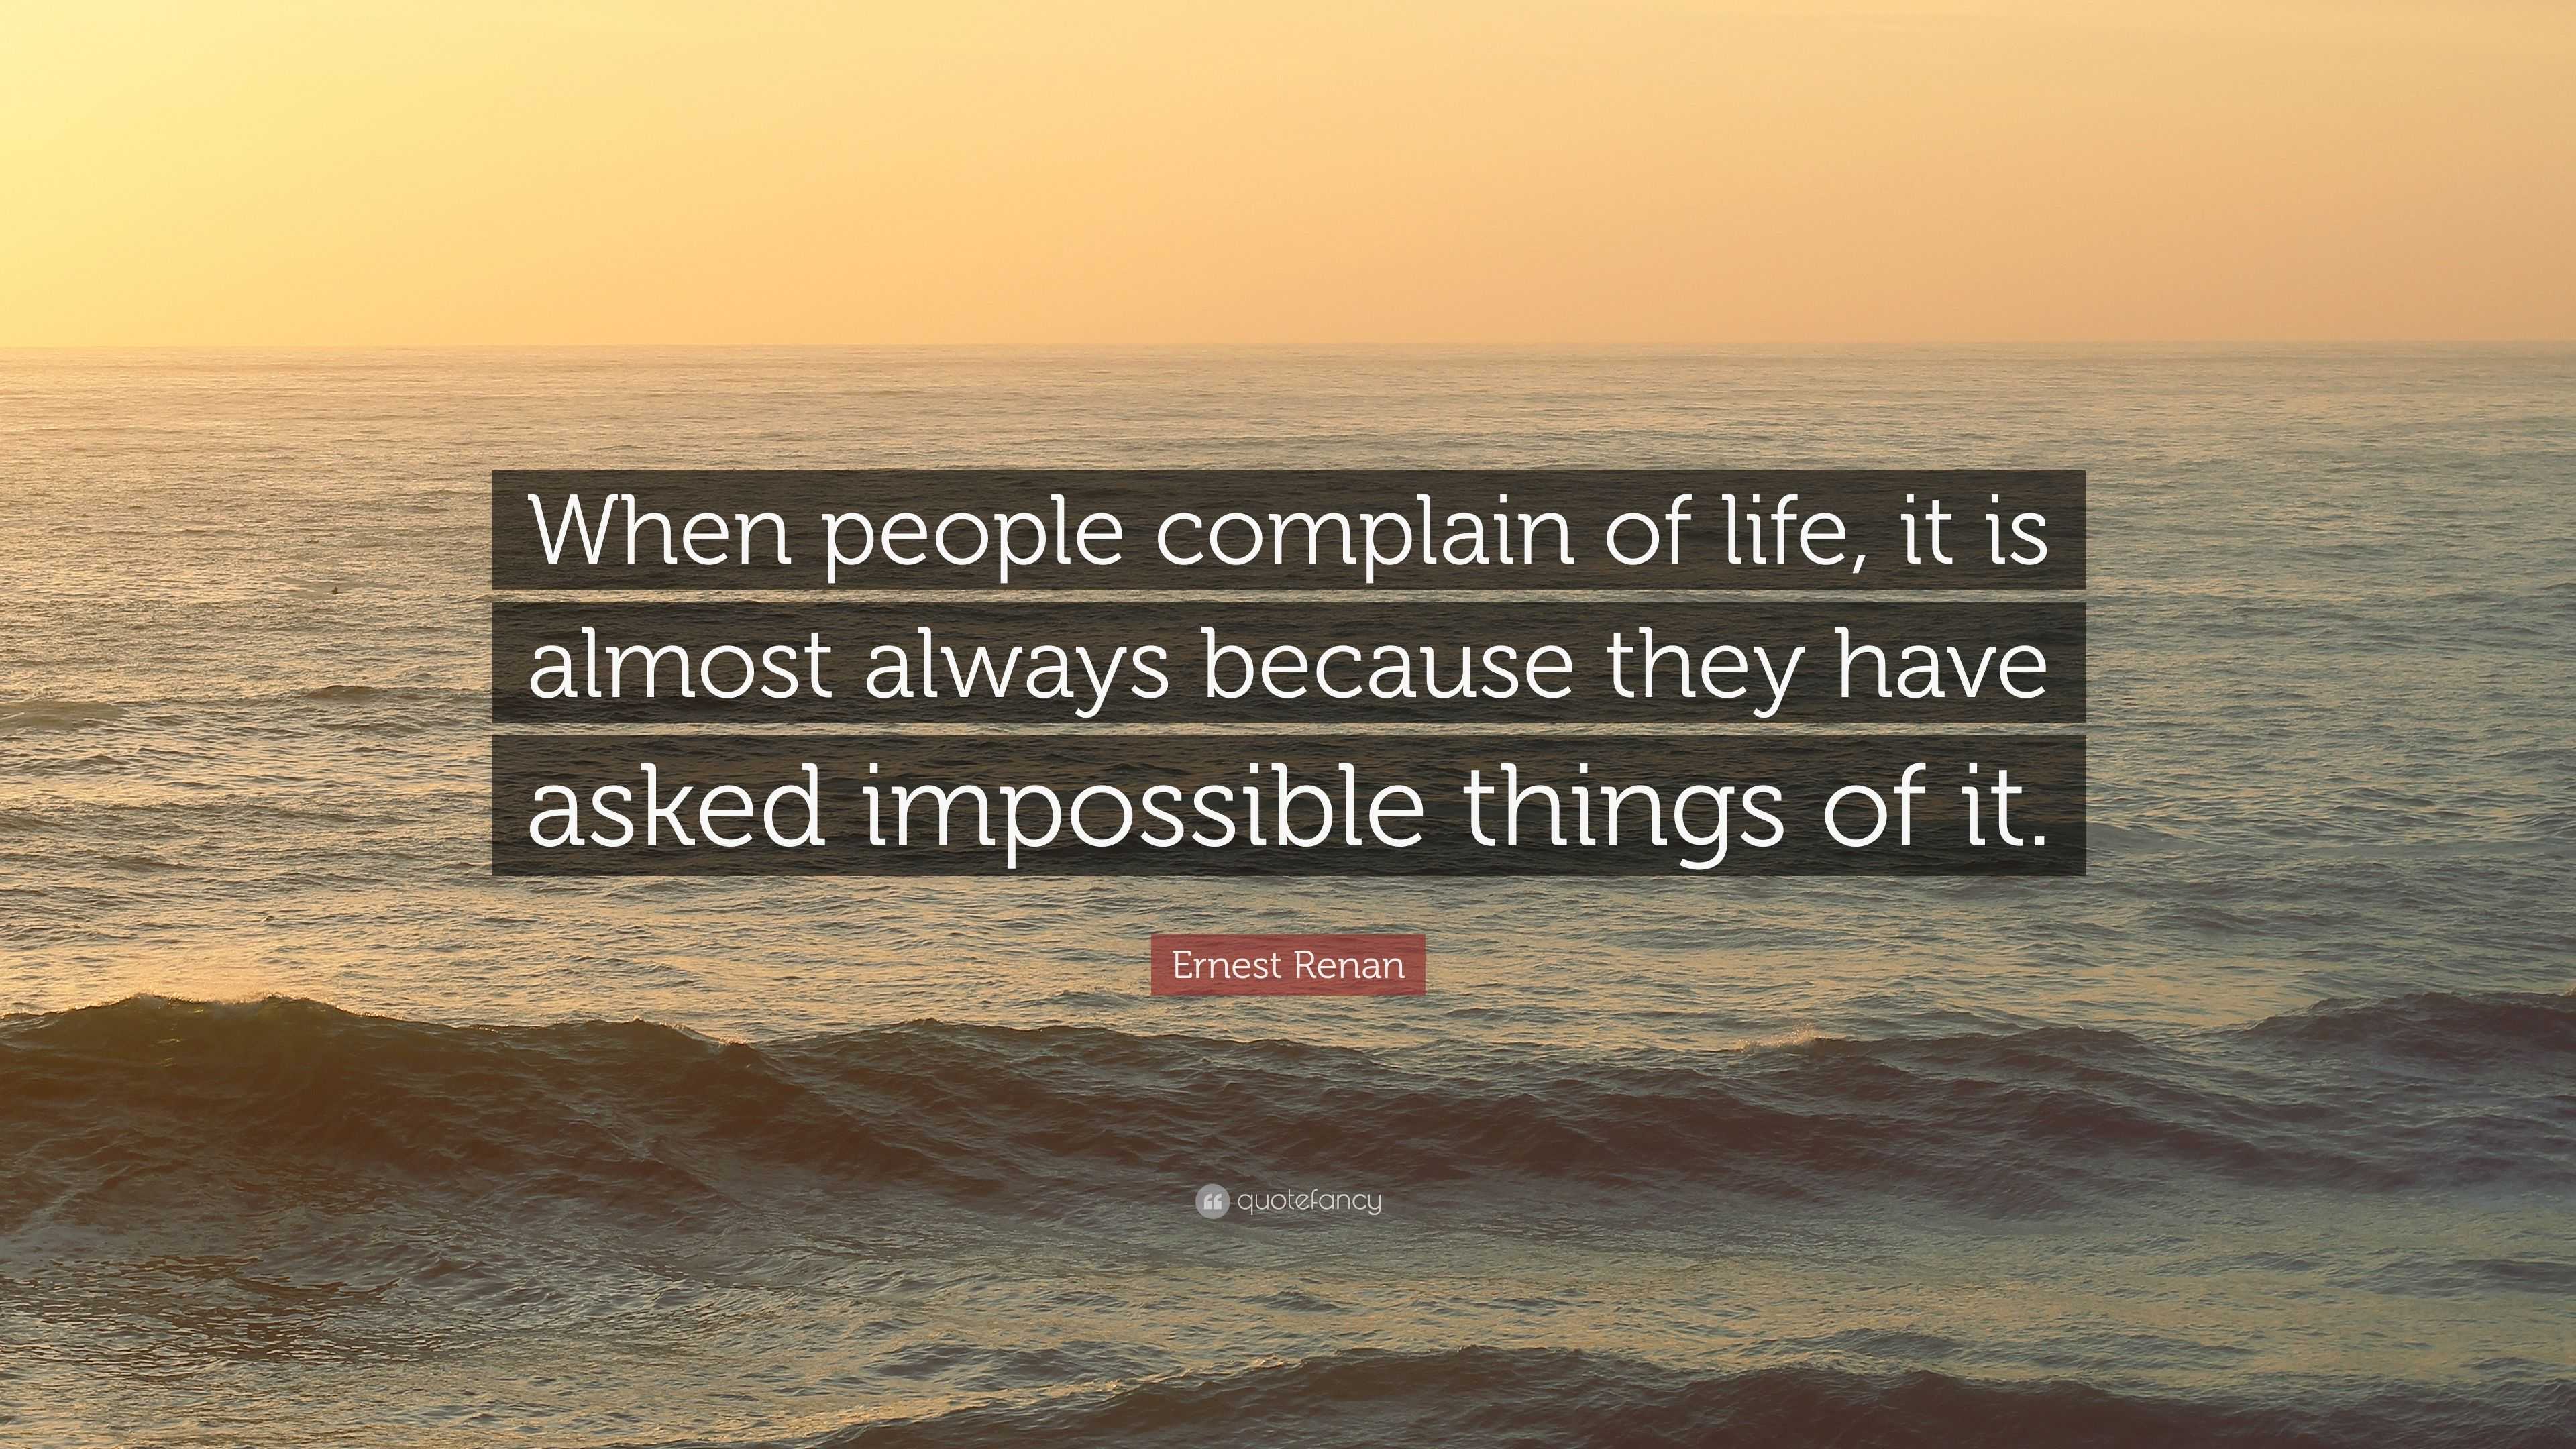 Ernest Renan Quote: “When people complain of life, it is almost always ...